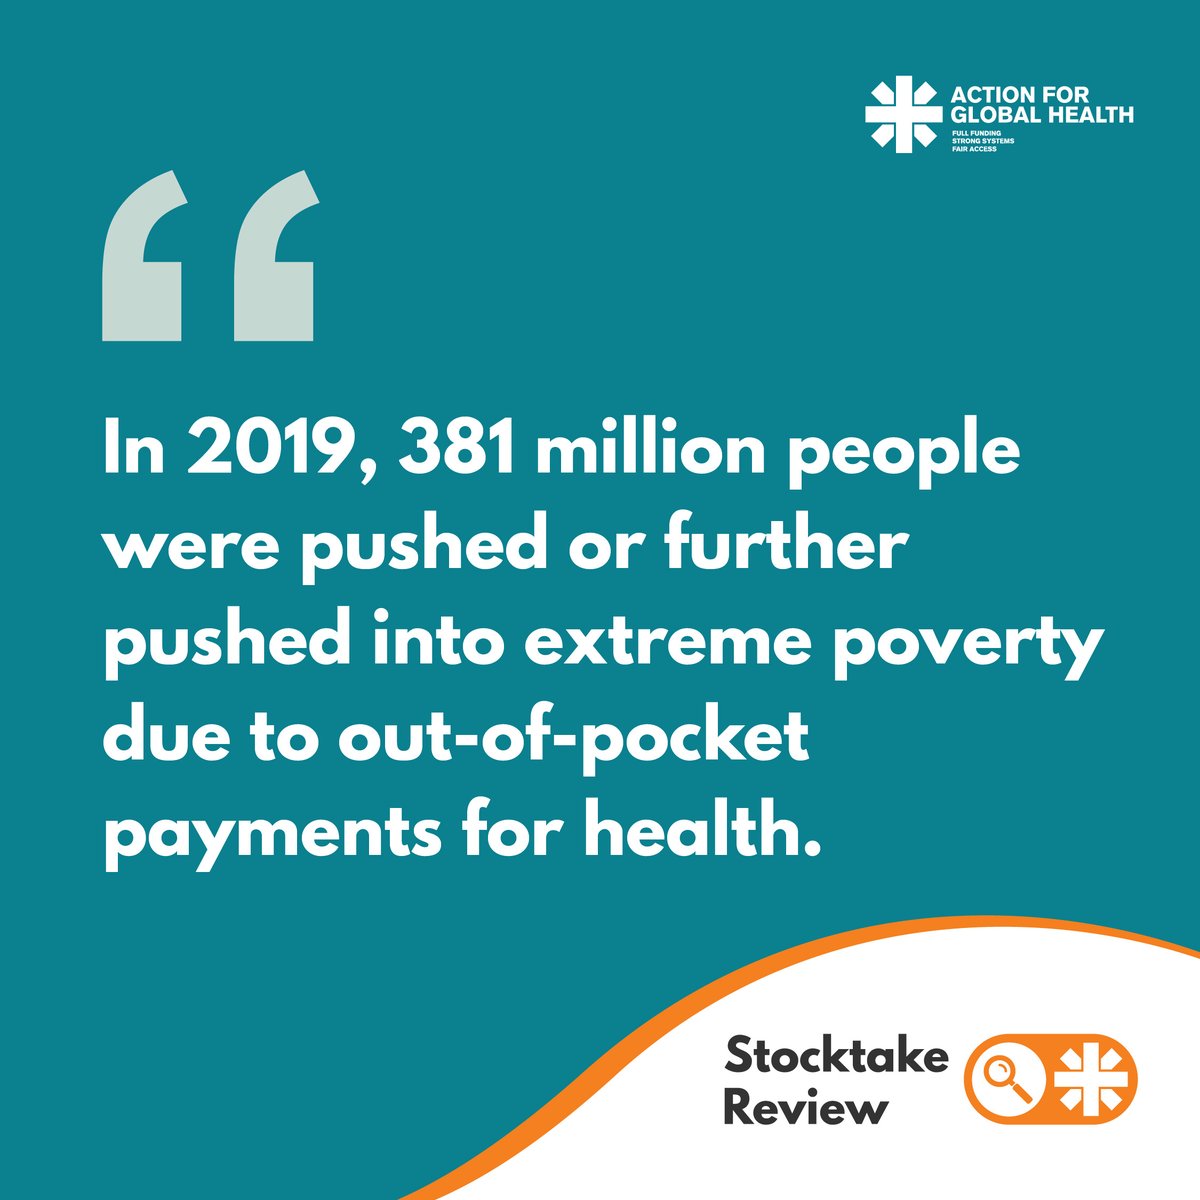 More than half of humanity lacks basic health coverage. This is pushing millions into severe poverty. Our #StocktakeReview advocates for a world where everyone, everywhere, has access to quality, affordable healthcare. Read it here 👉bit.ly/4dxed1u